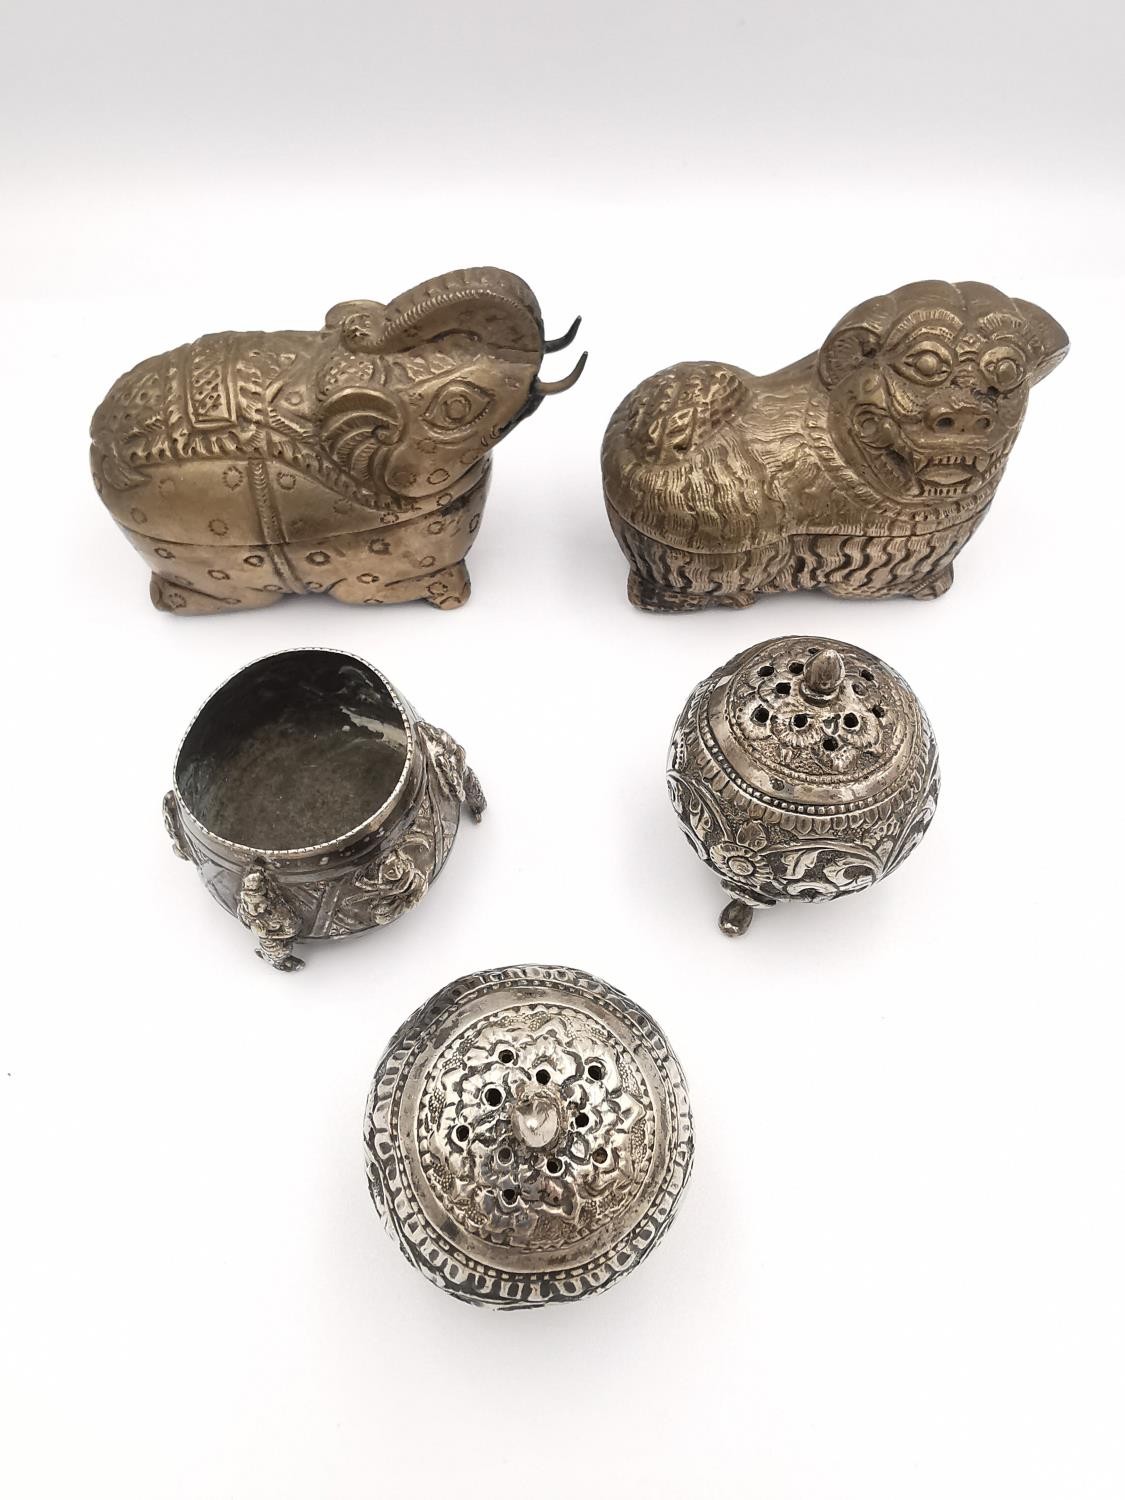 A collection of Indian and Chinese white metal items (tests as silver), including two repousse